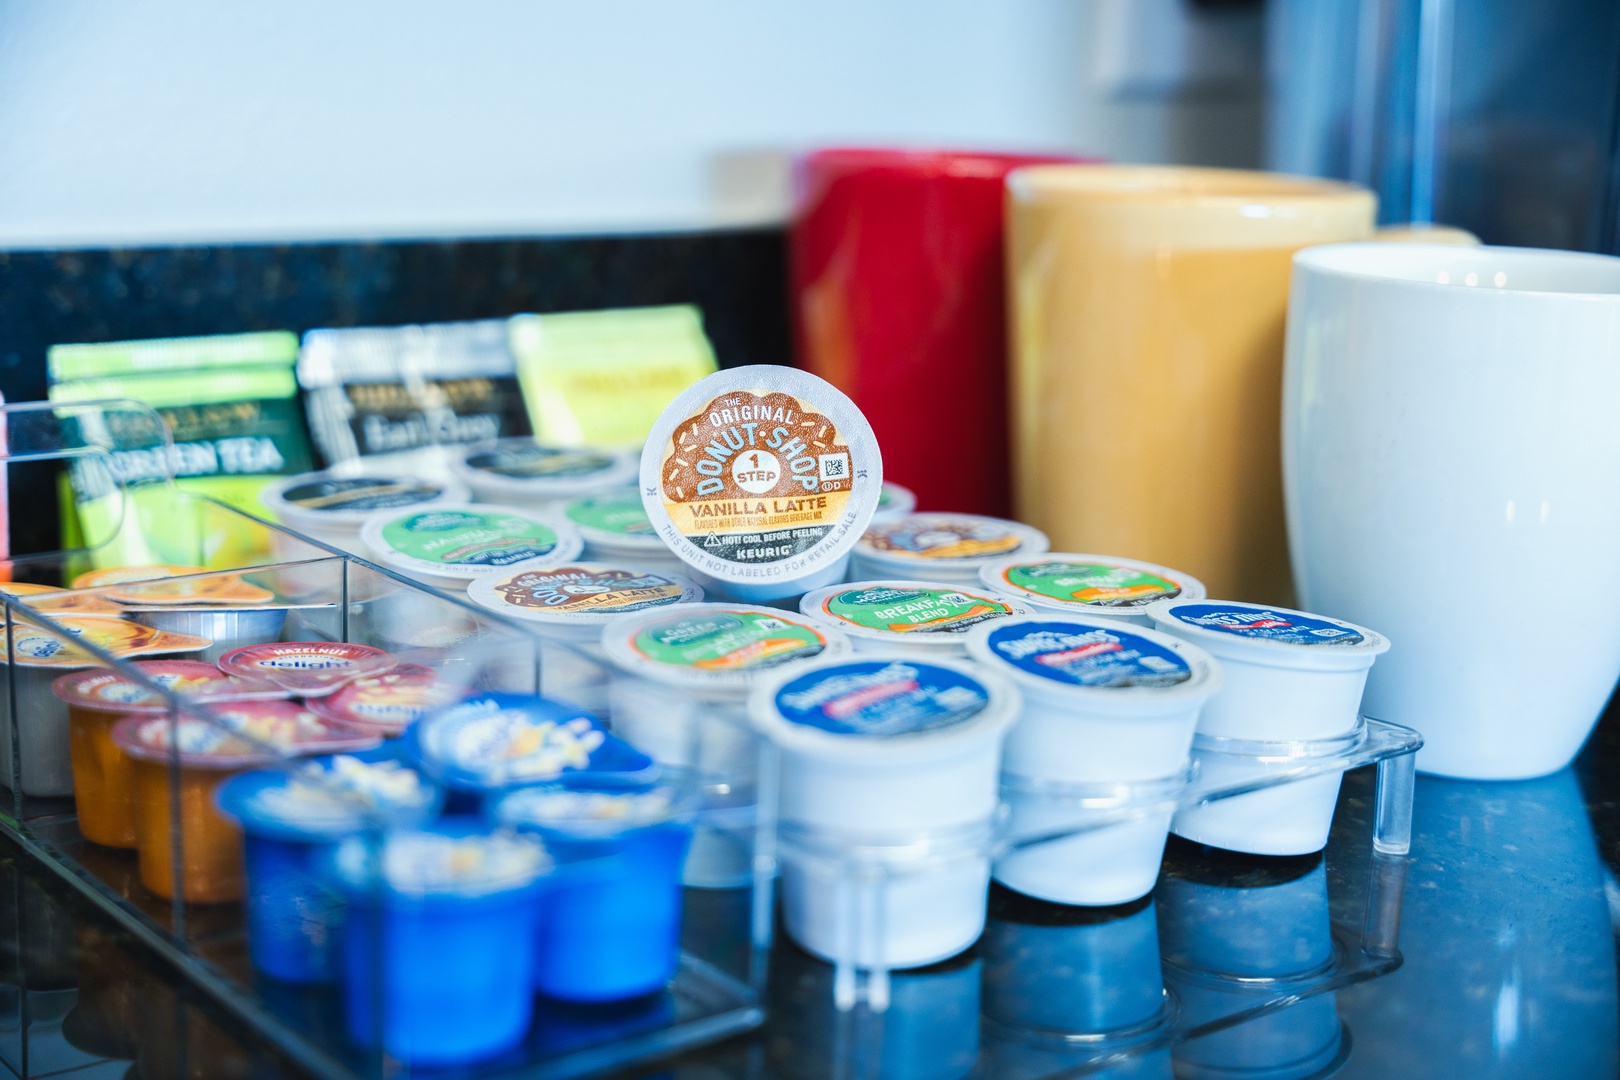 Enjoy a delicious selection of coffee, tea, cream, and sweeteners included with your stay